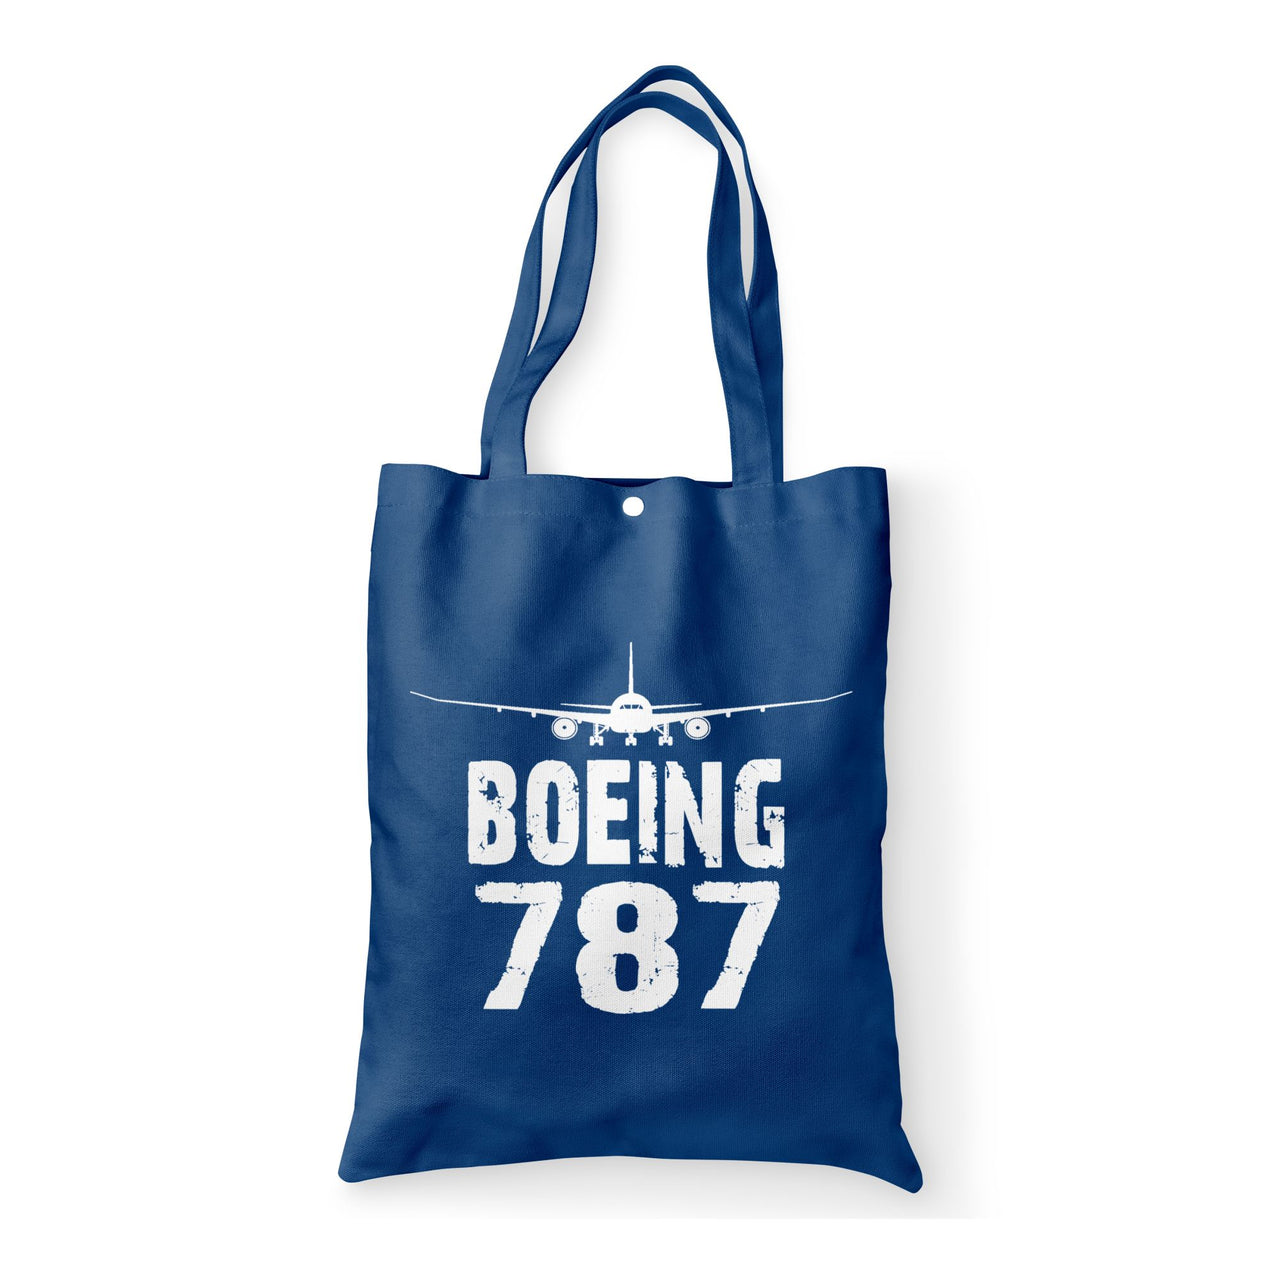 Boeing 787 & Plane Designed Tote Bags